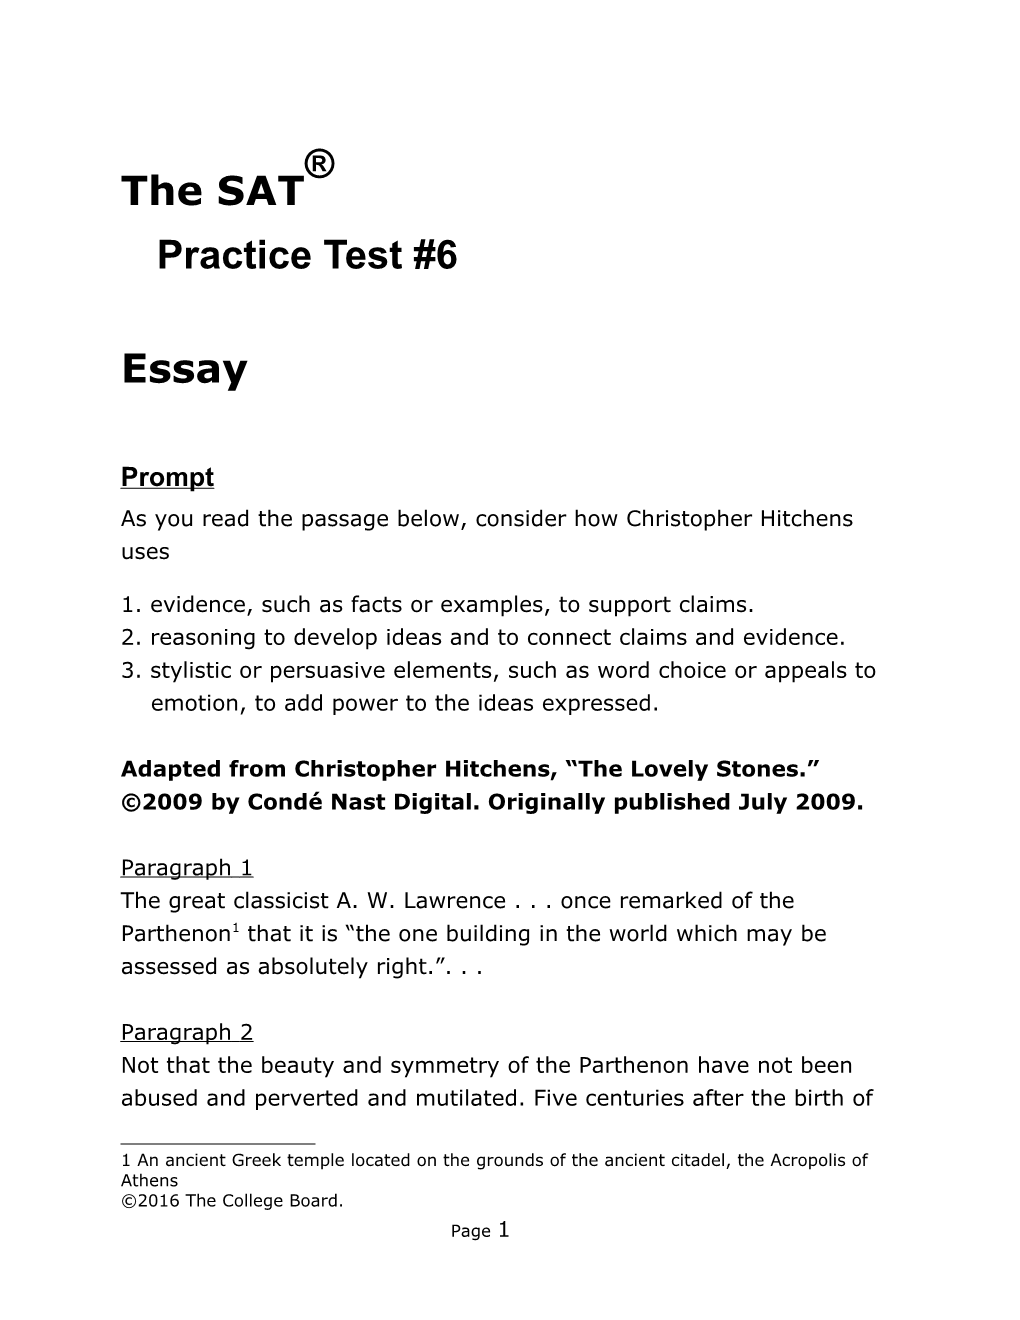 SAT Practice Test 6 Essay for Assistive Technology SAT Suite of Assessments the College Board